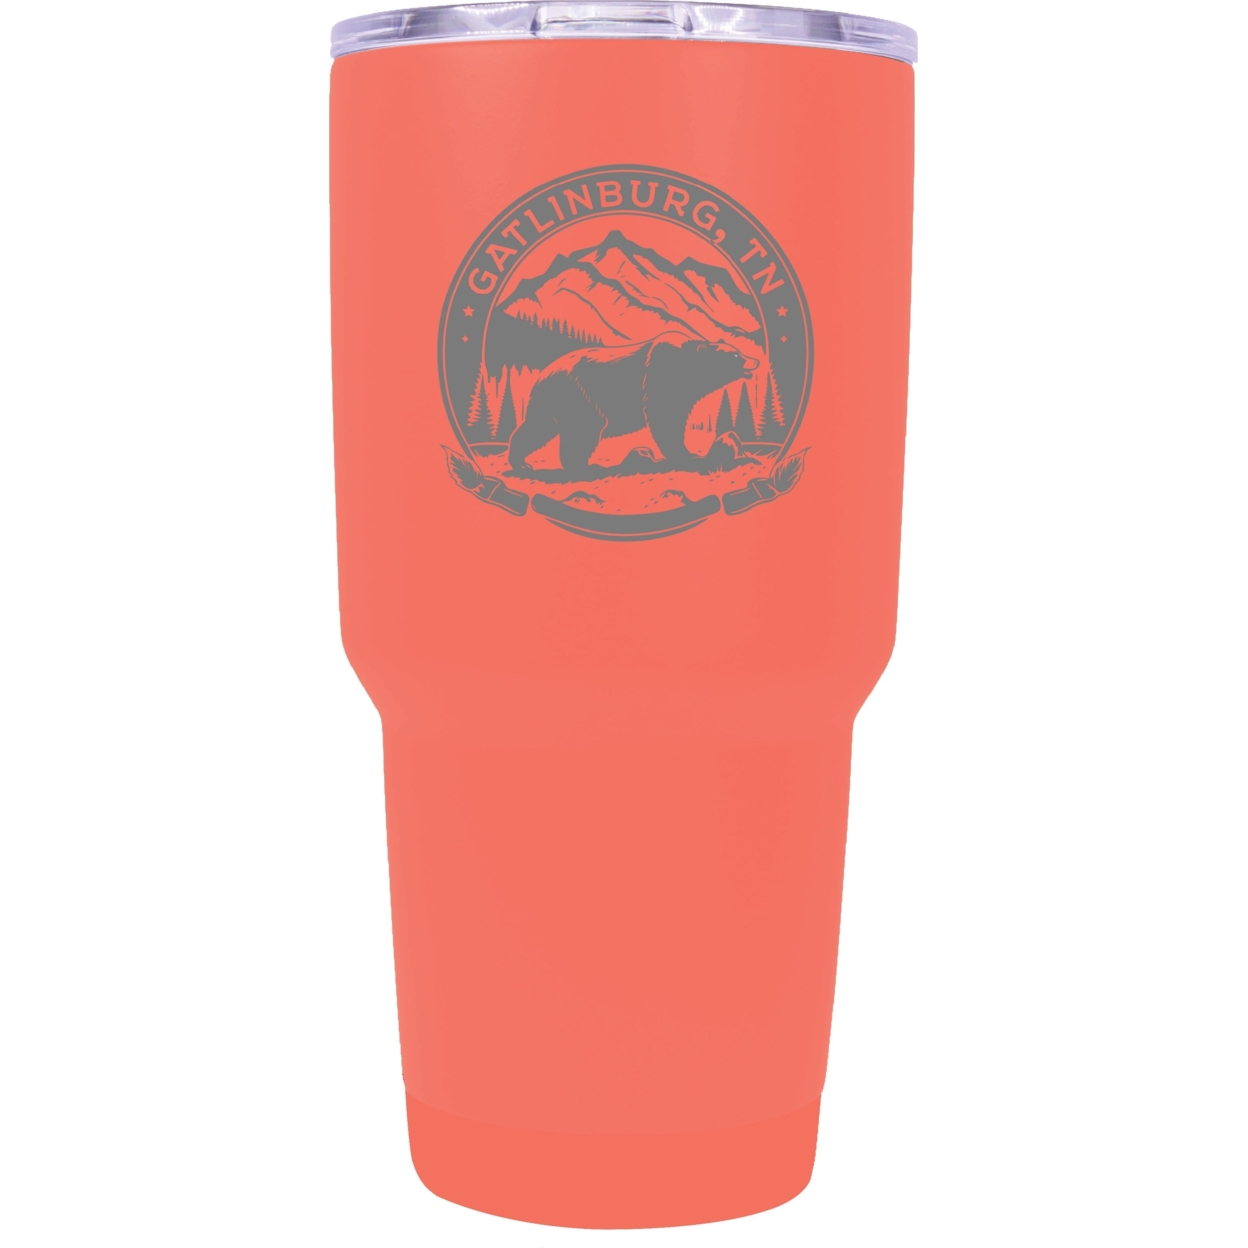 Gatlinburg Tennessee Laser Etched Souvenir 24 Oz Insulated Stainless Steel Tumbler - Gray